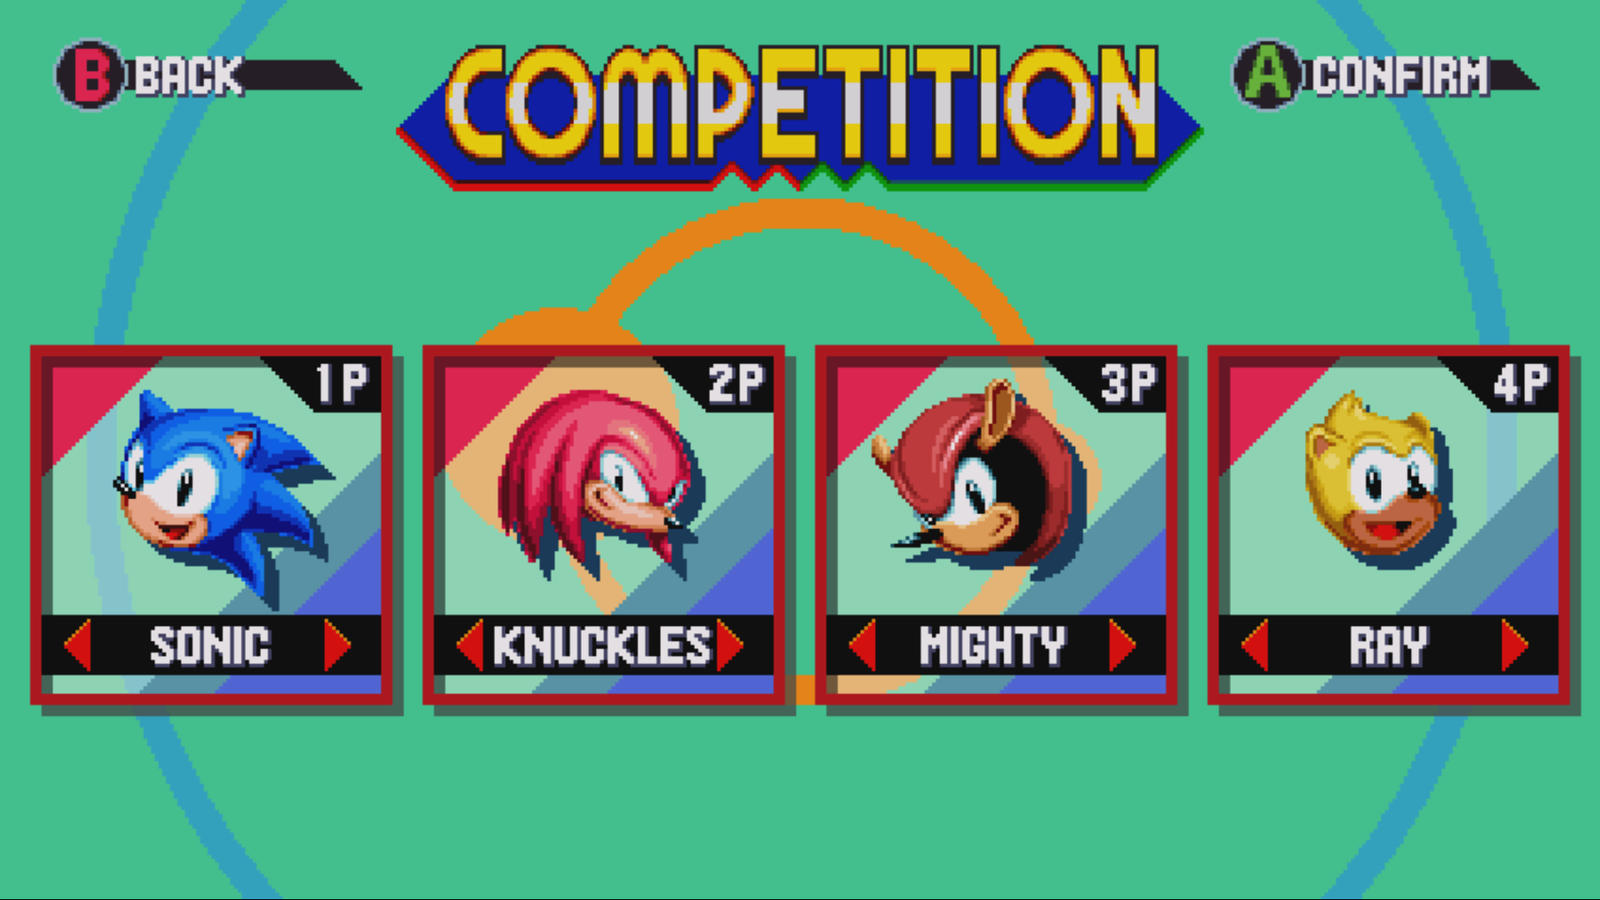 Sonic, Knuckles, Mighty and Ray at Competition Mode.